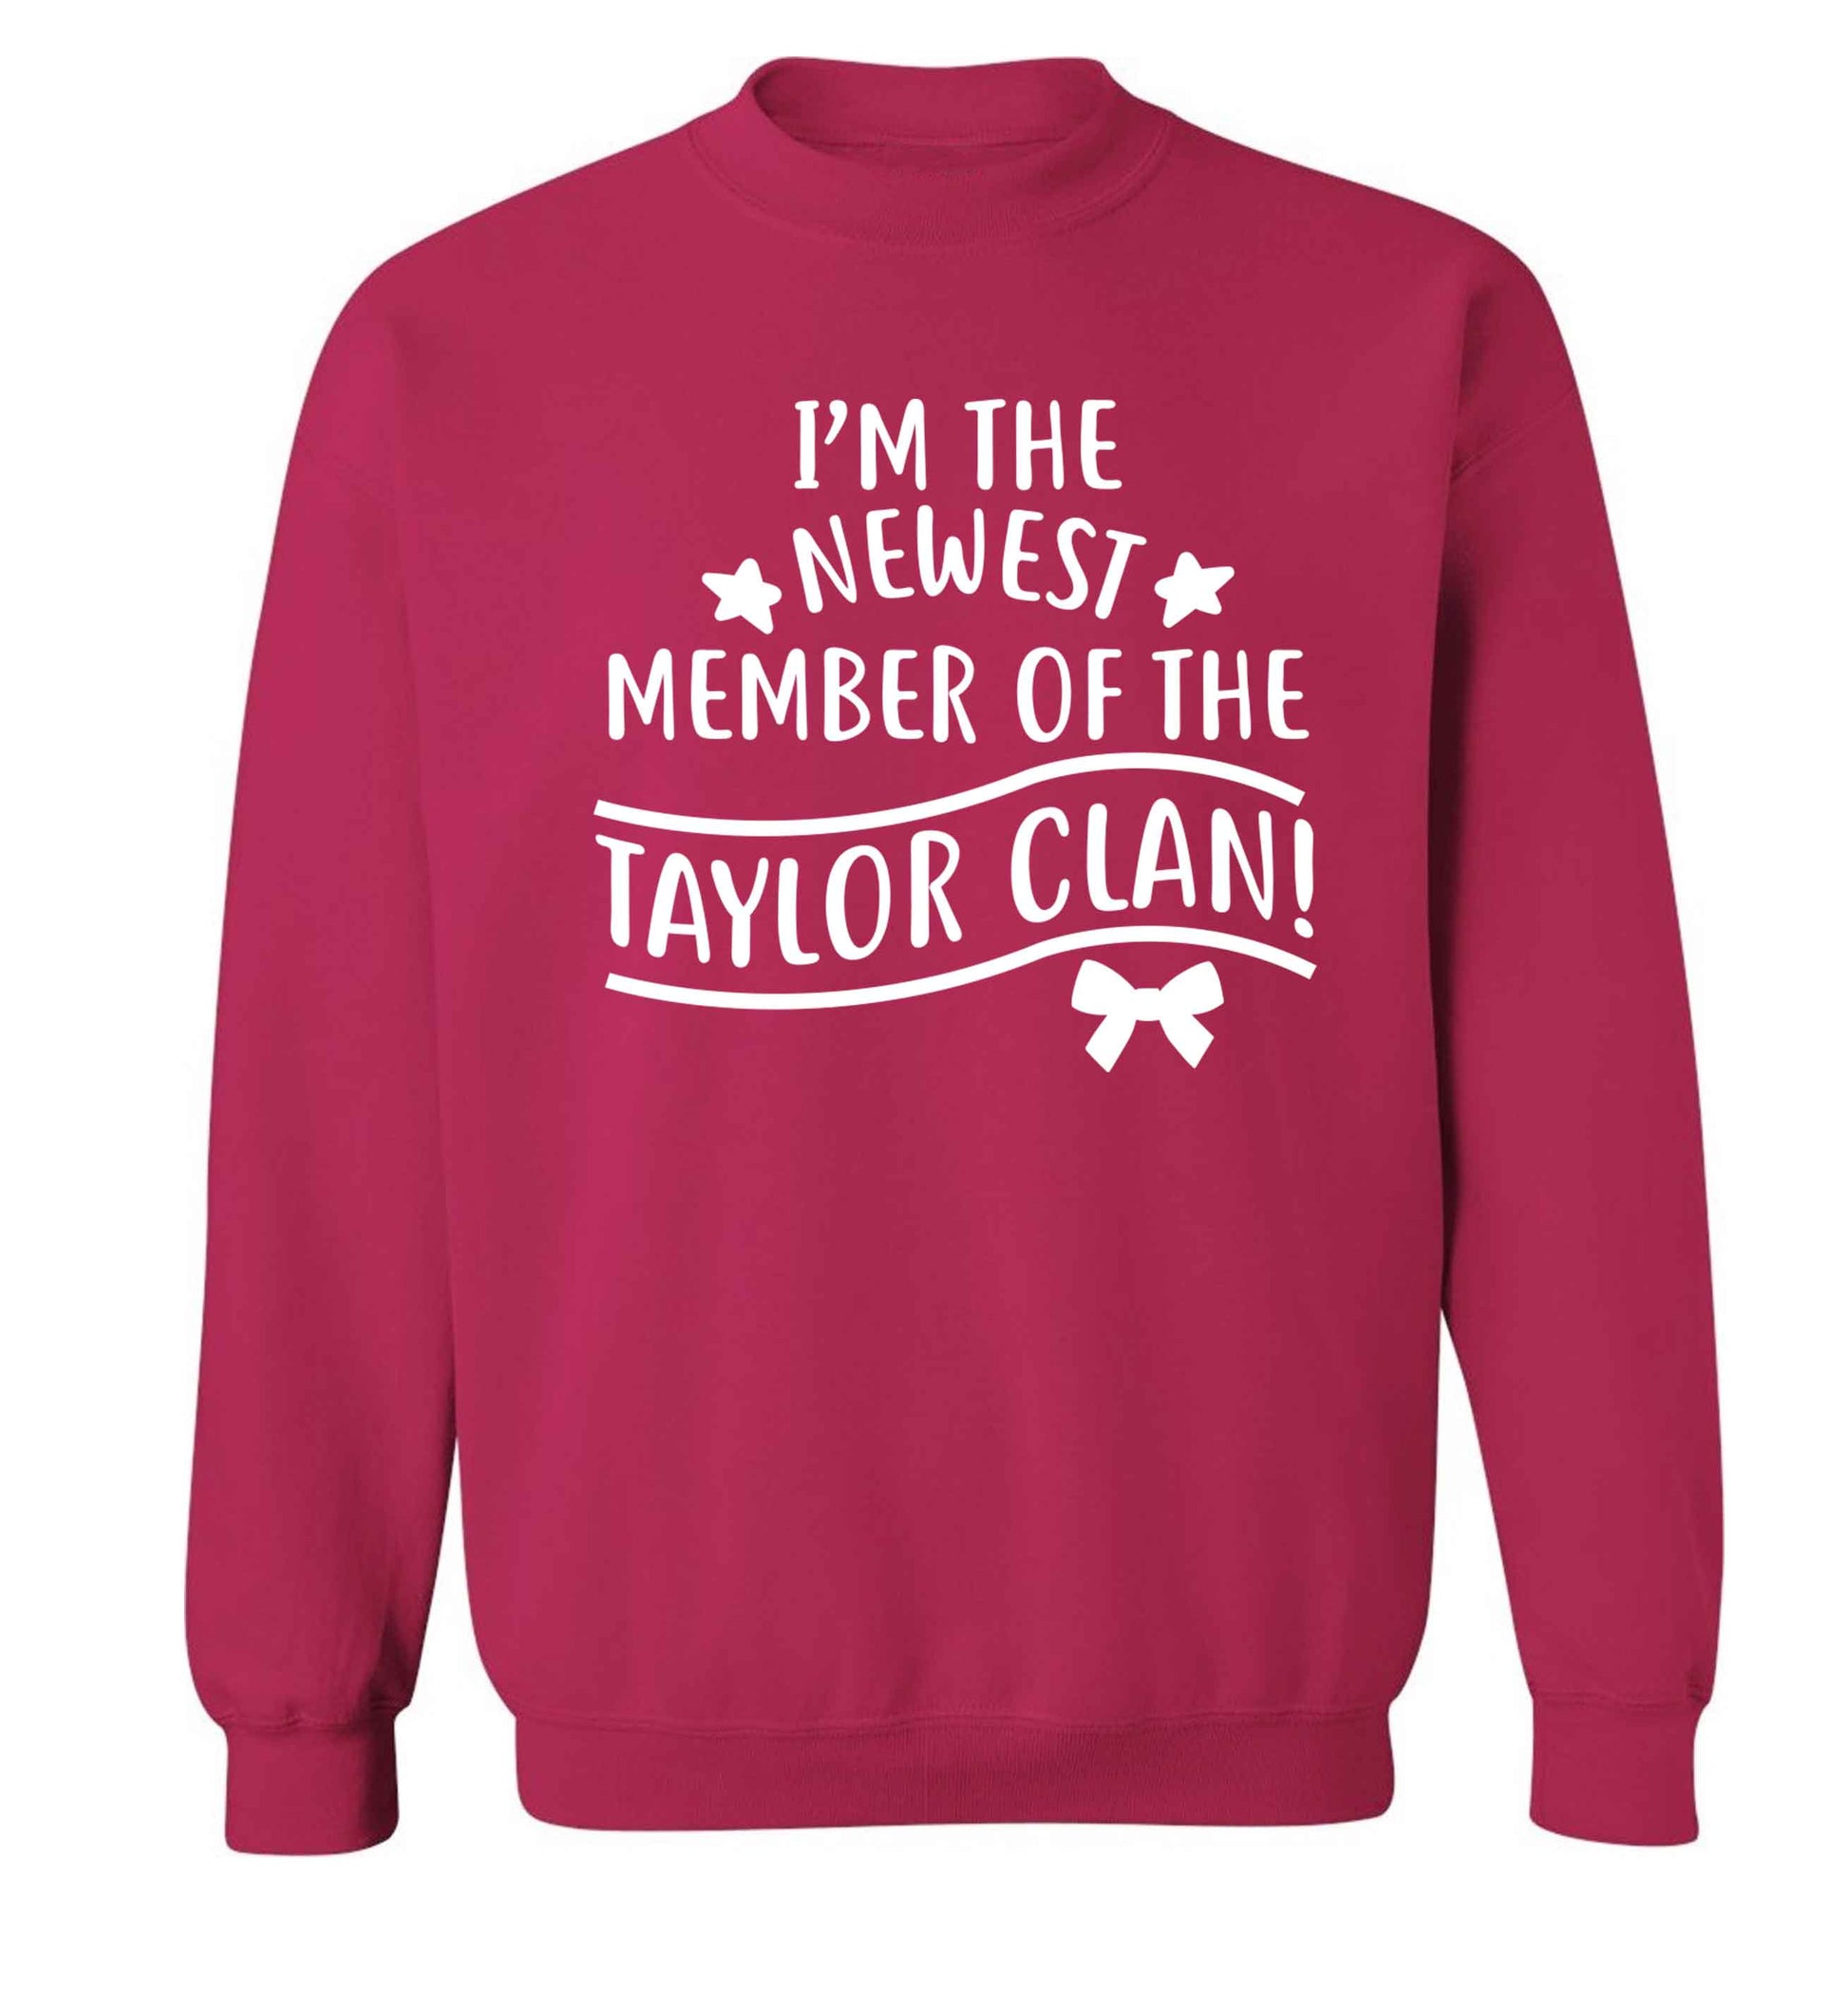 Personalised, newest member of the Taylor clan Adult's unisex pink Sweater 2XL